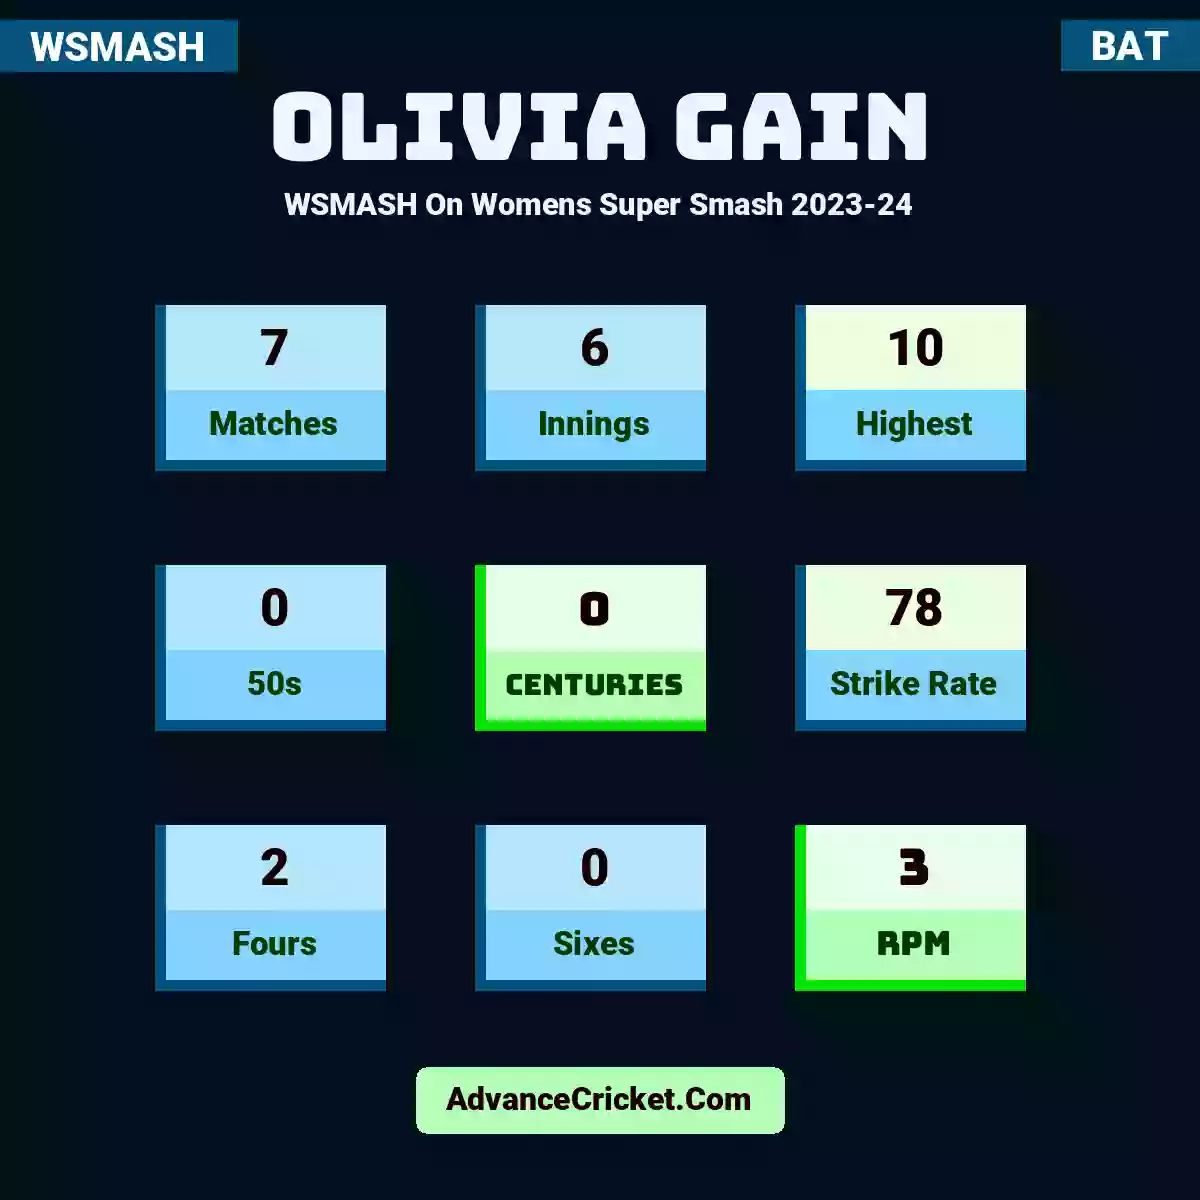 Olivia Gain WSMASH  On Womens Super Smash 2023-24, Olivia Gain played 7 matches, scored 10 runs as highest, 0 half-centuries, and 0 centuries, with a strike rate of 78. O.Gain hit 2 fours and 0 sixes, with an RPM of 3.